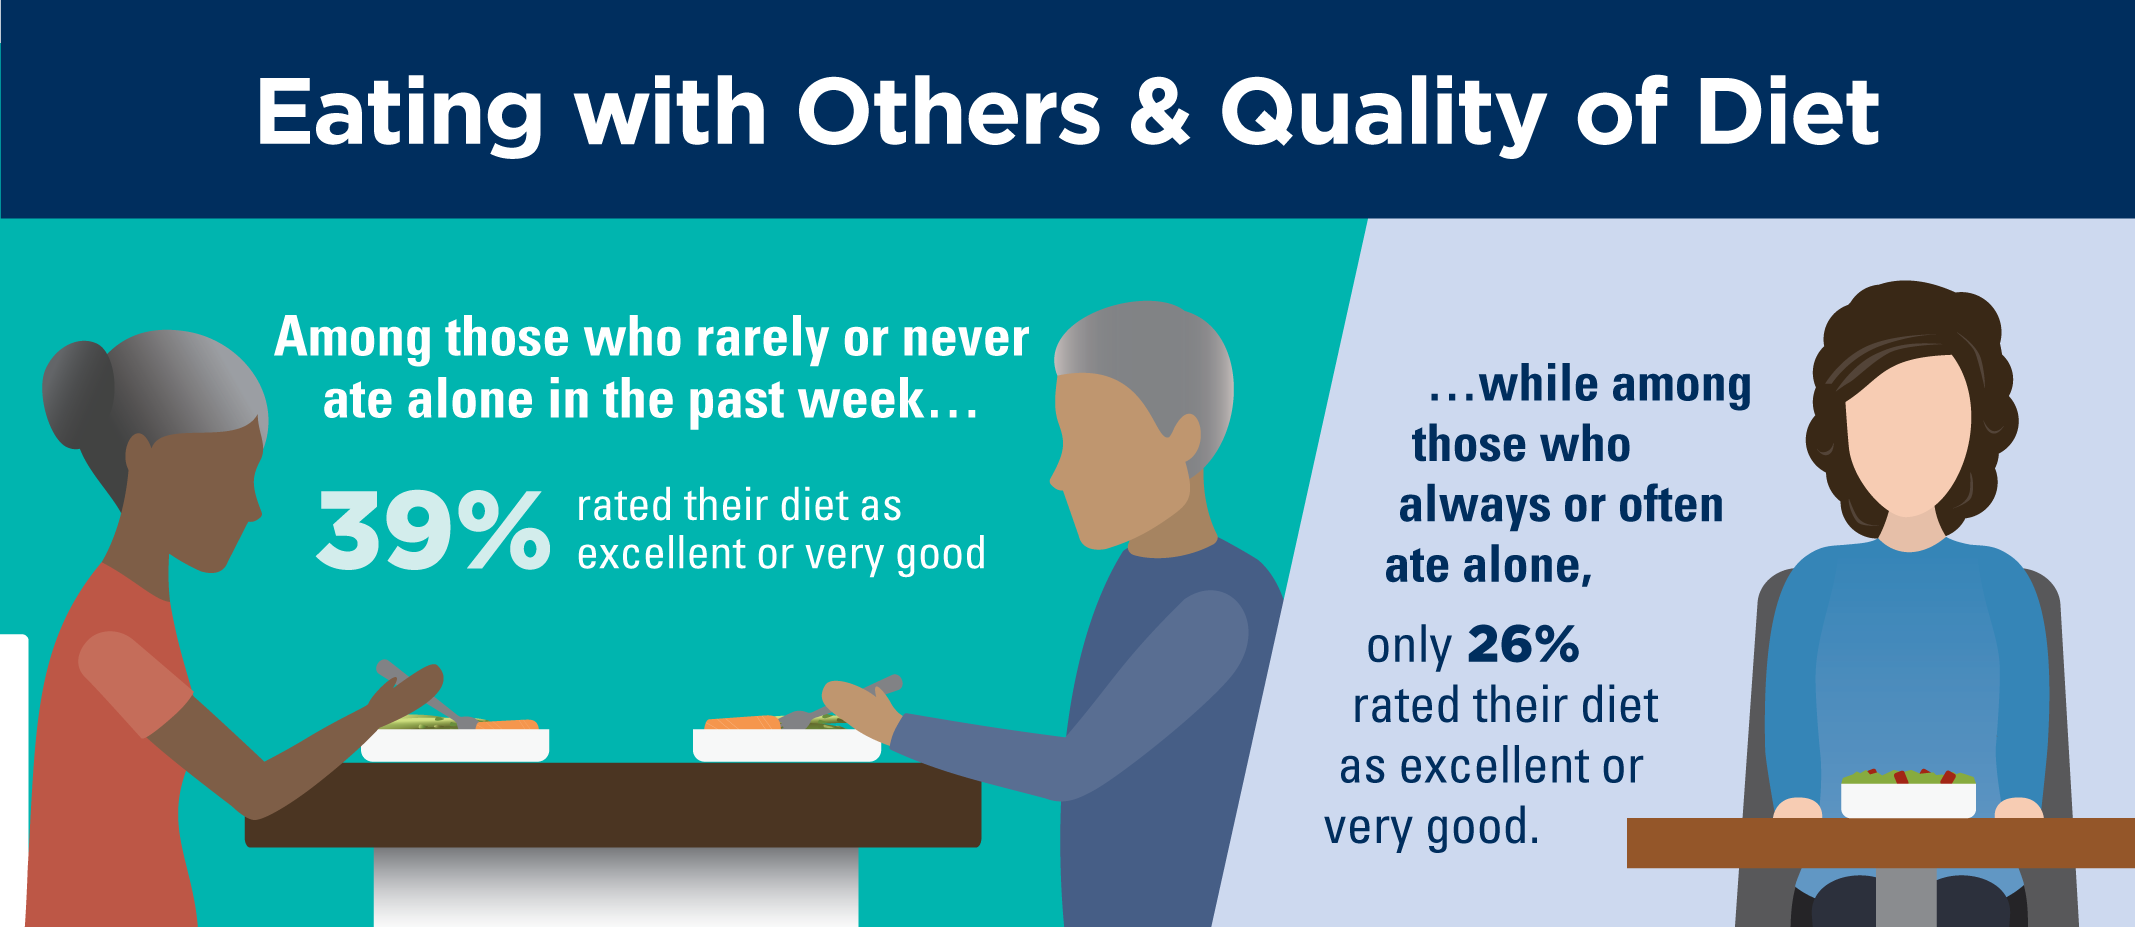 Eating with Others and Quality of Diet